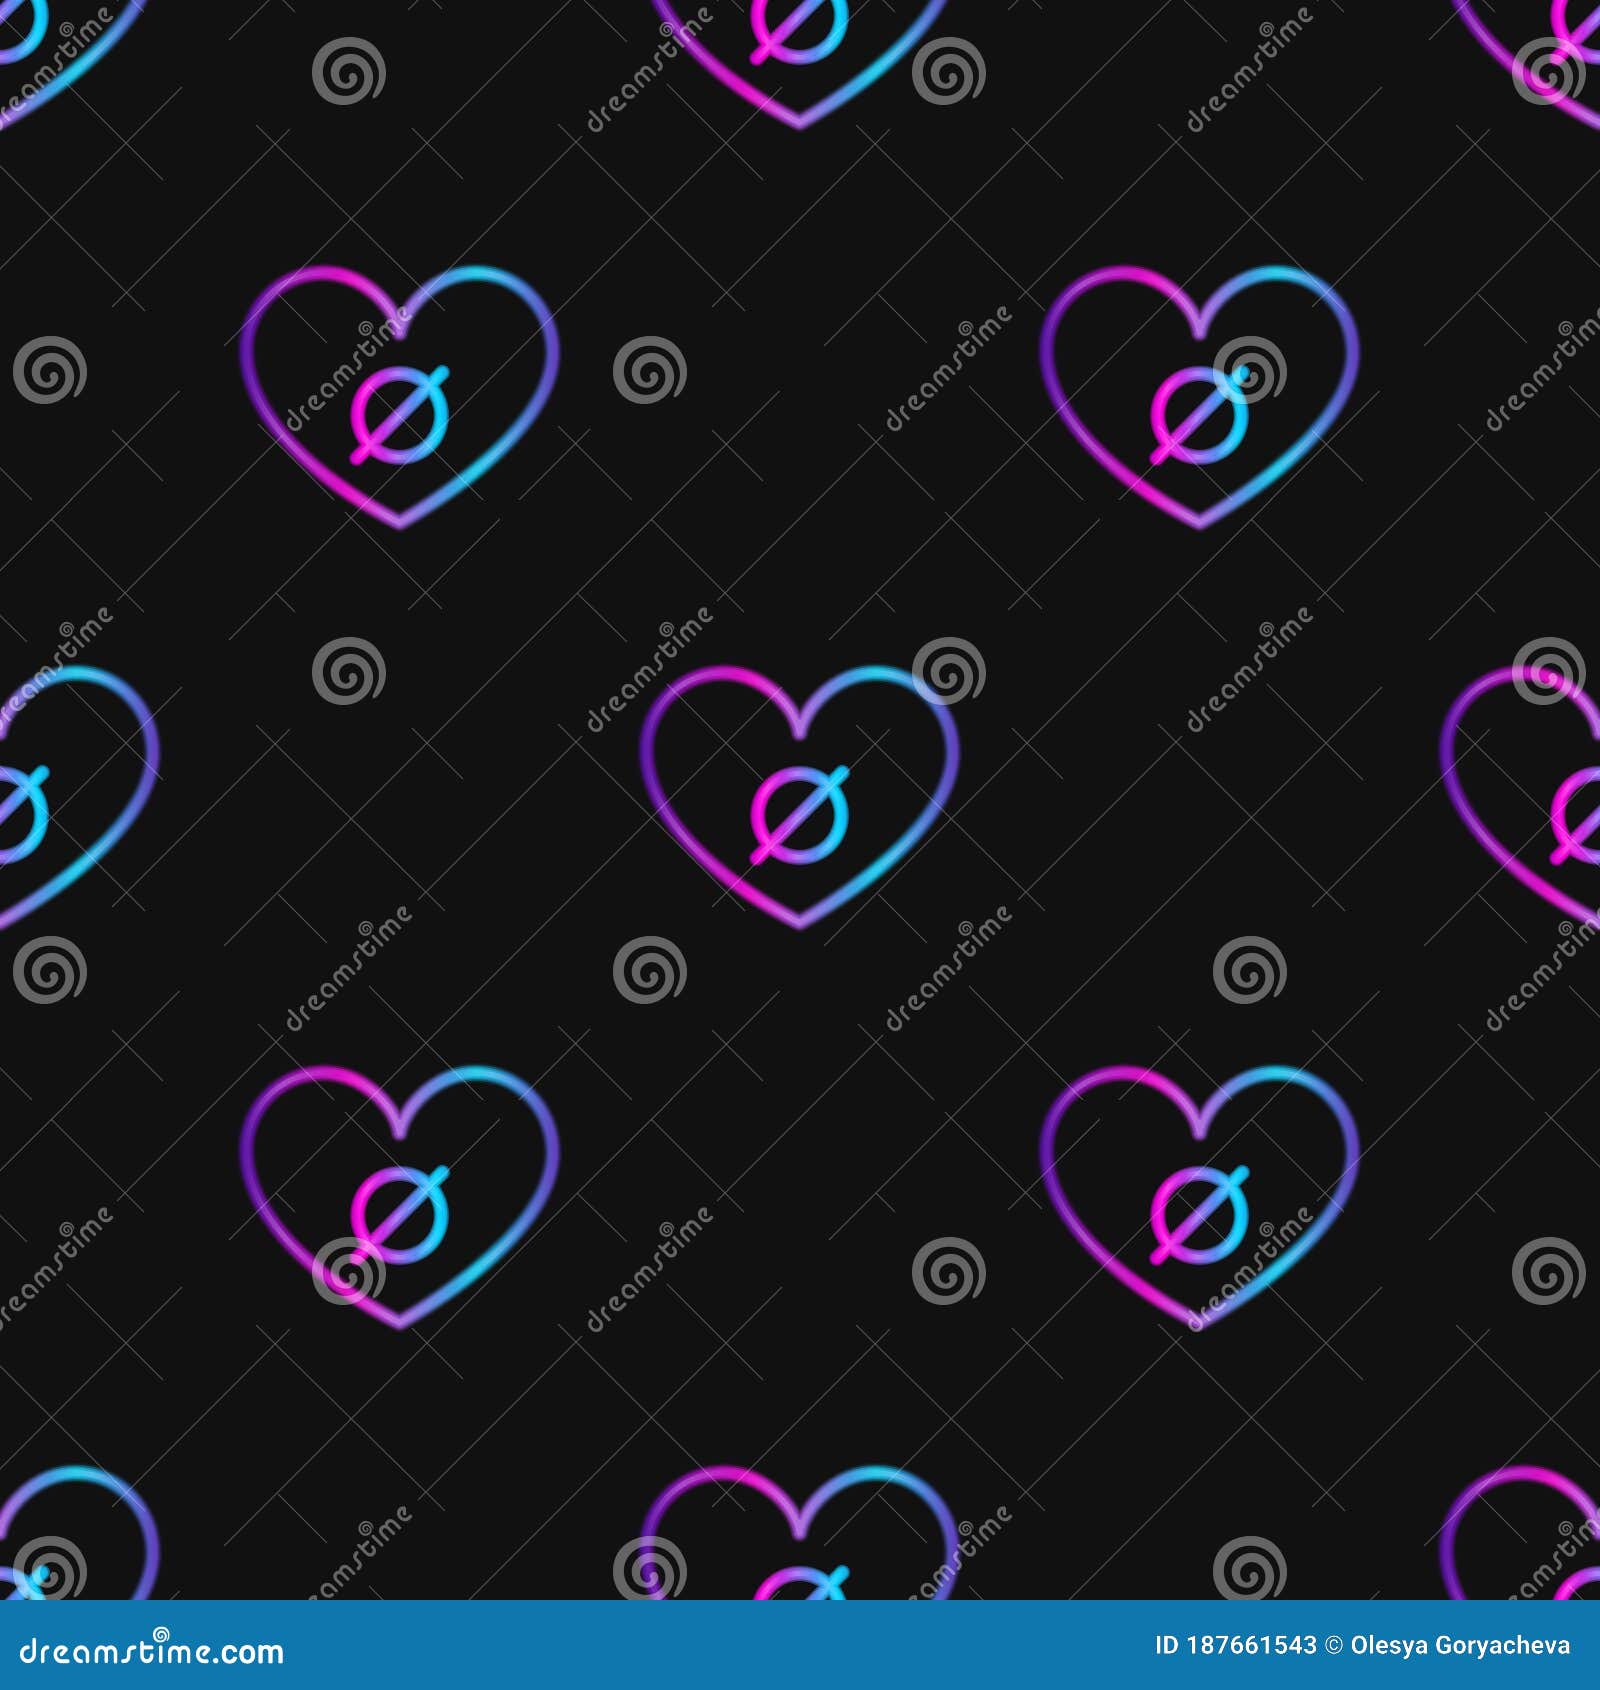 Seamless Pattern With Neon Heart With Agender Symbol On Black Background Stock Illustration Illustration Of Gender Object